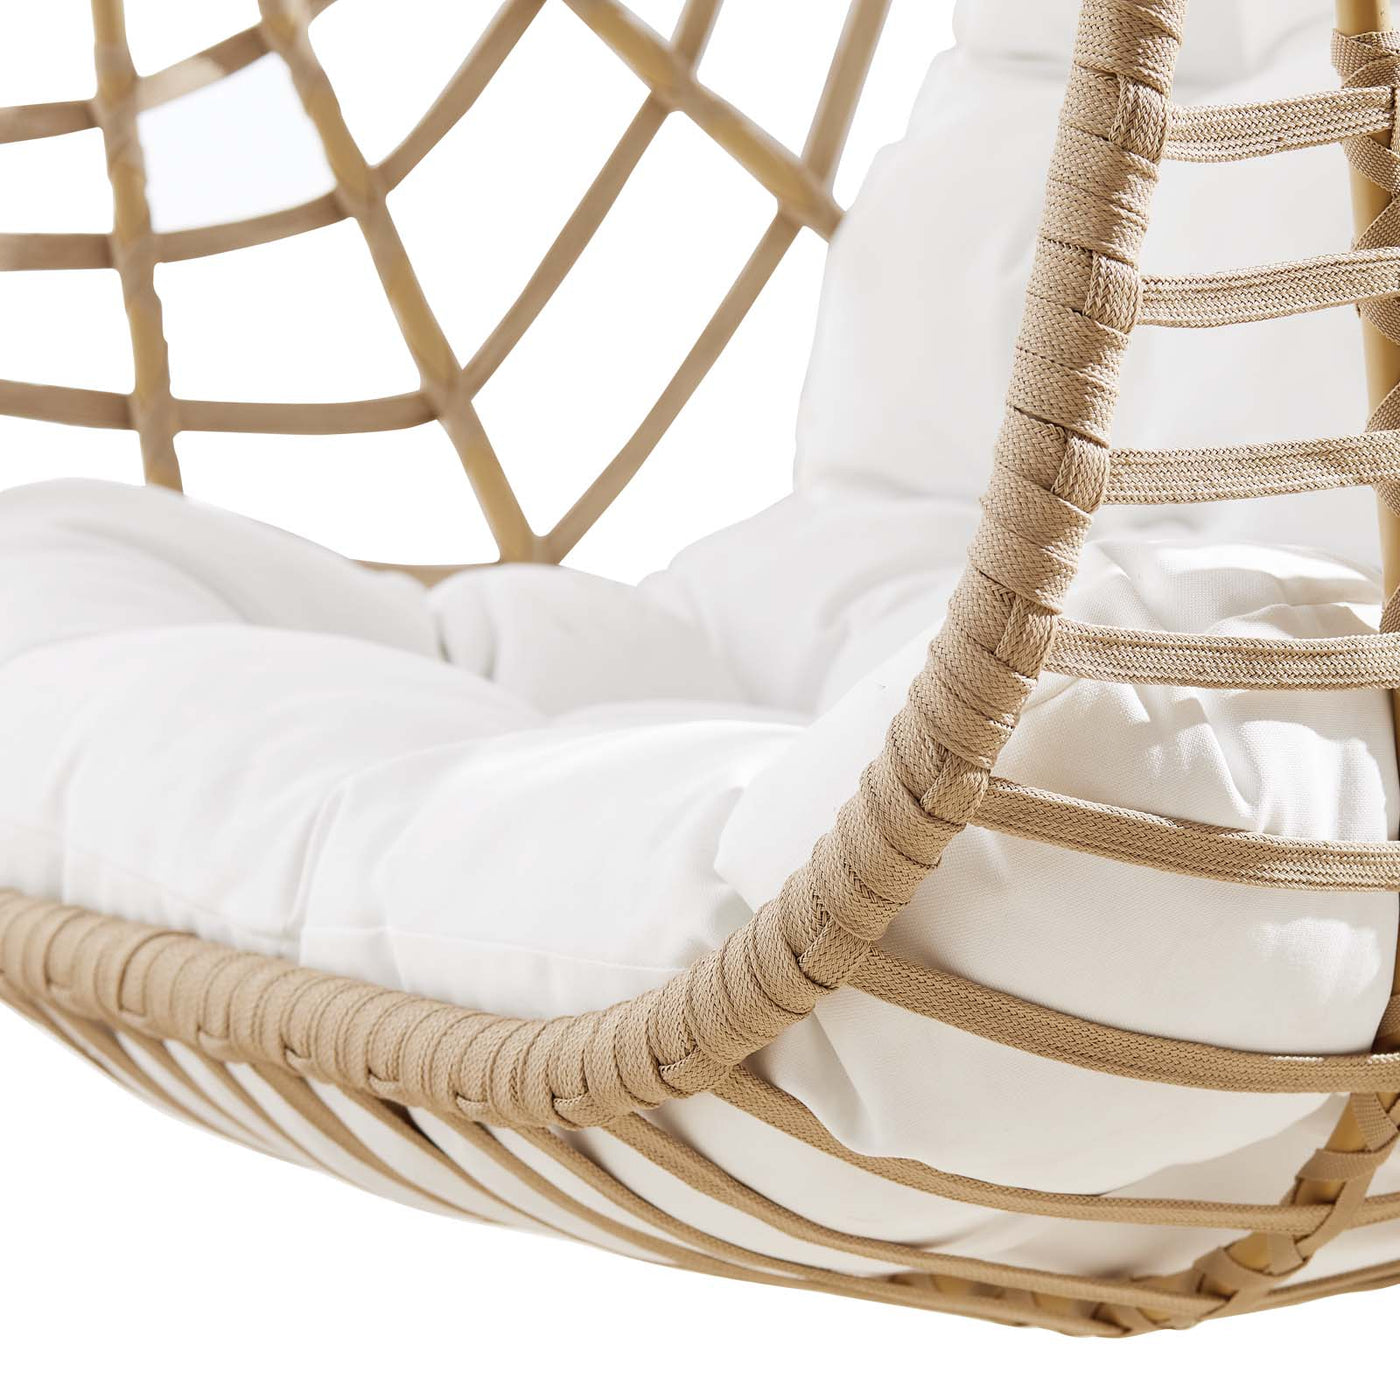 Alma Cocoon Rattan Chairs – Lily & Cane